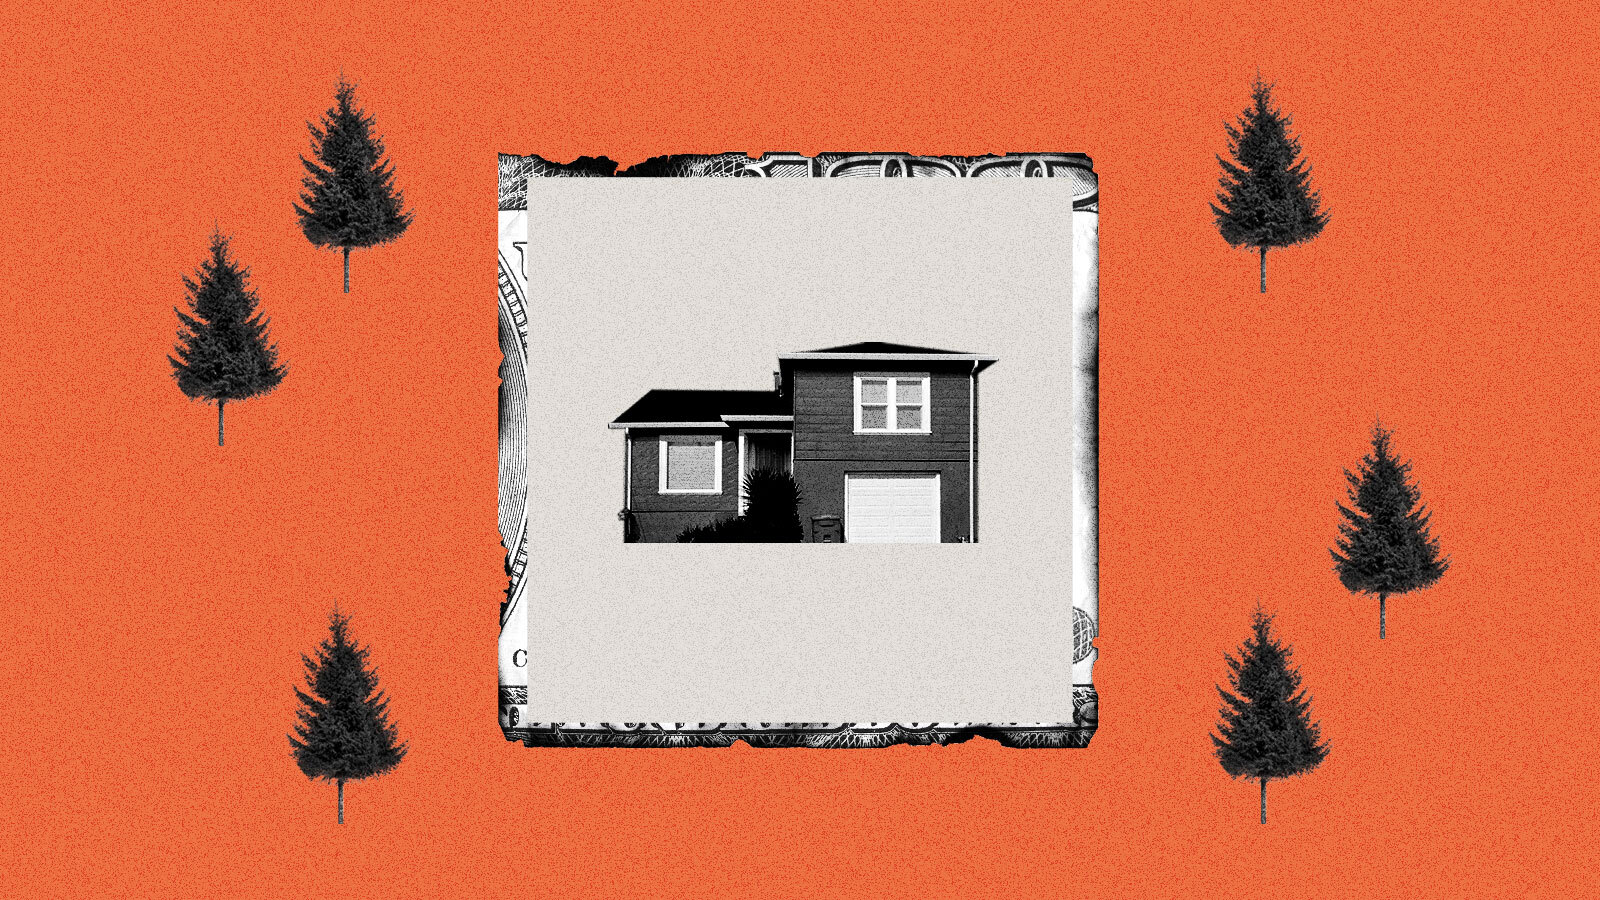 Collage of a house protected by a square border cut from a hundred dollar bill. Outside the border are trees on a fiery red background. The edges of the border are singed.